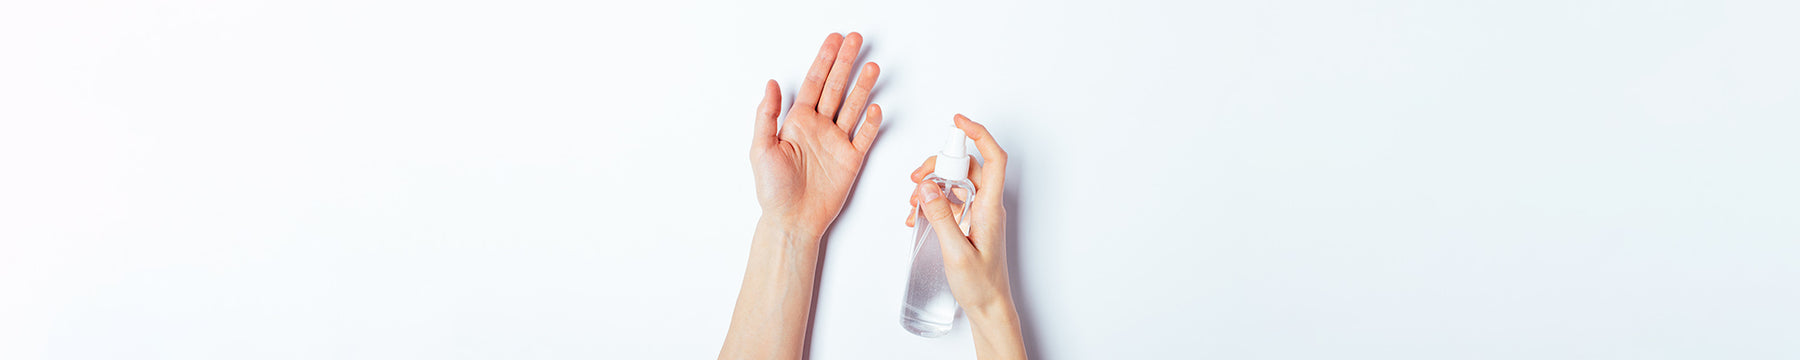 Using Hand Sanitizer on Pimples - Is It Even Advisable?